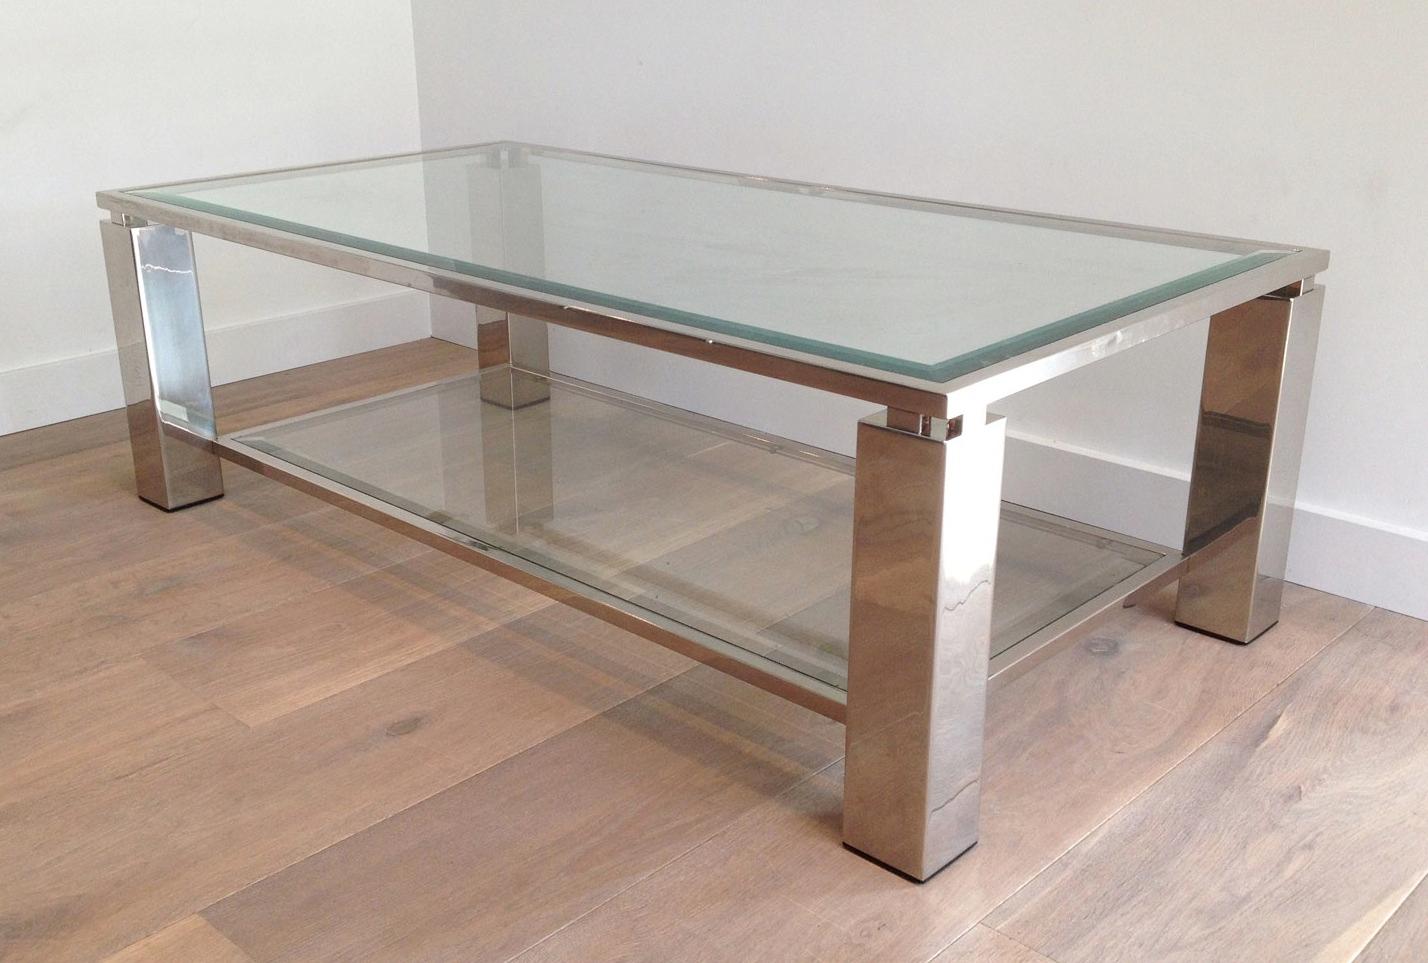 This interesting modernist coffee table is made of chrome with two glass shelves. The top glass is beveled. This is a nice design from a French designer, made in the 1970s.